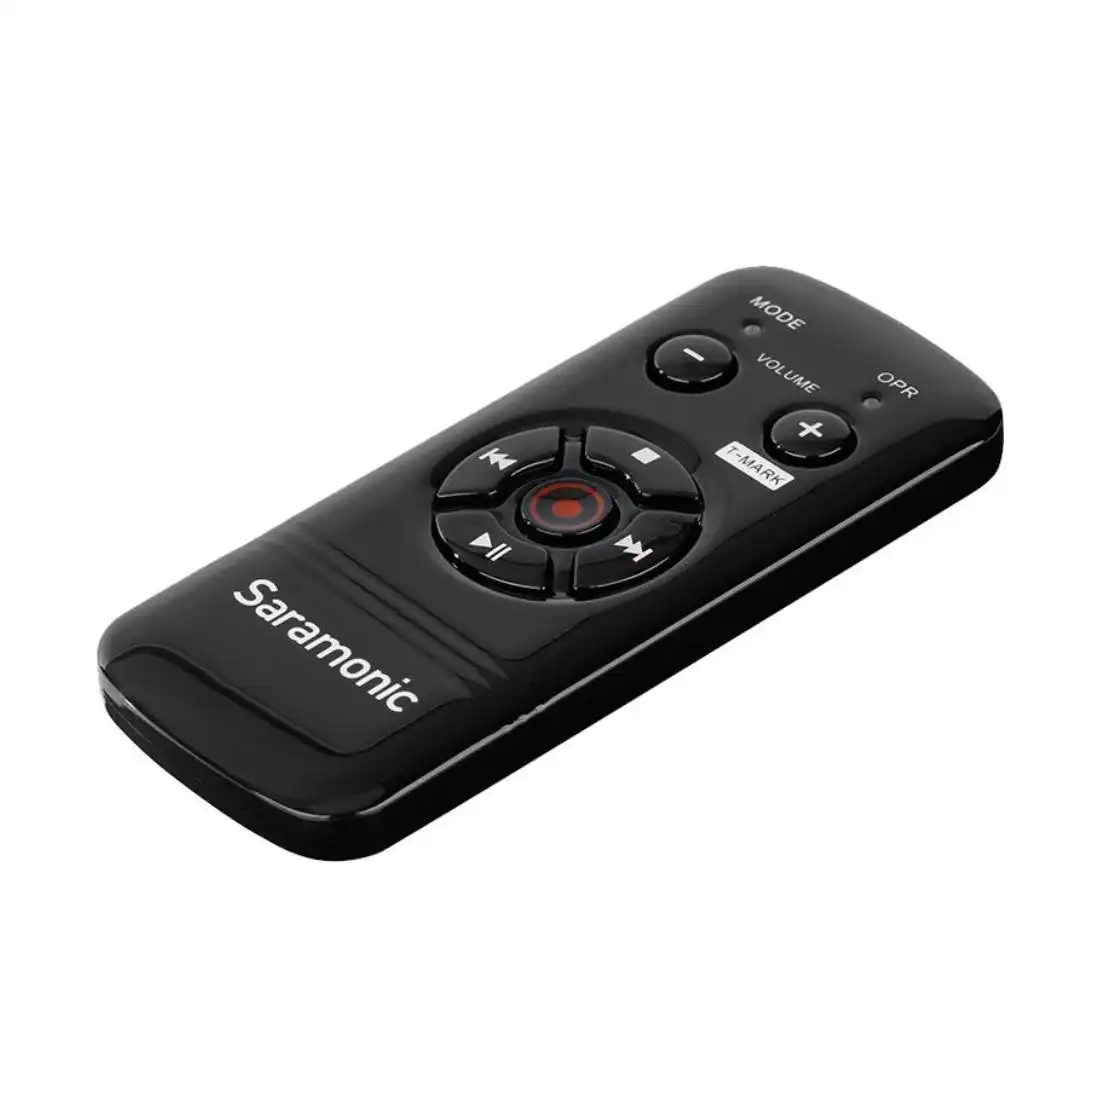 Saramonic RC-X Remote control for Zoom and Sony handy Recorders